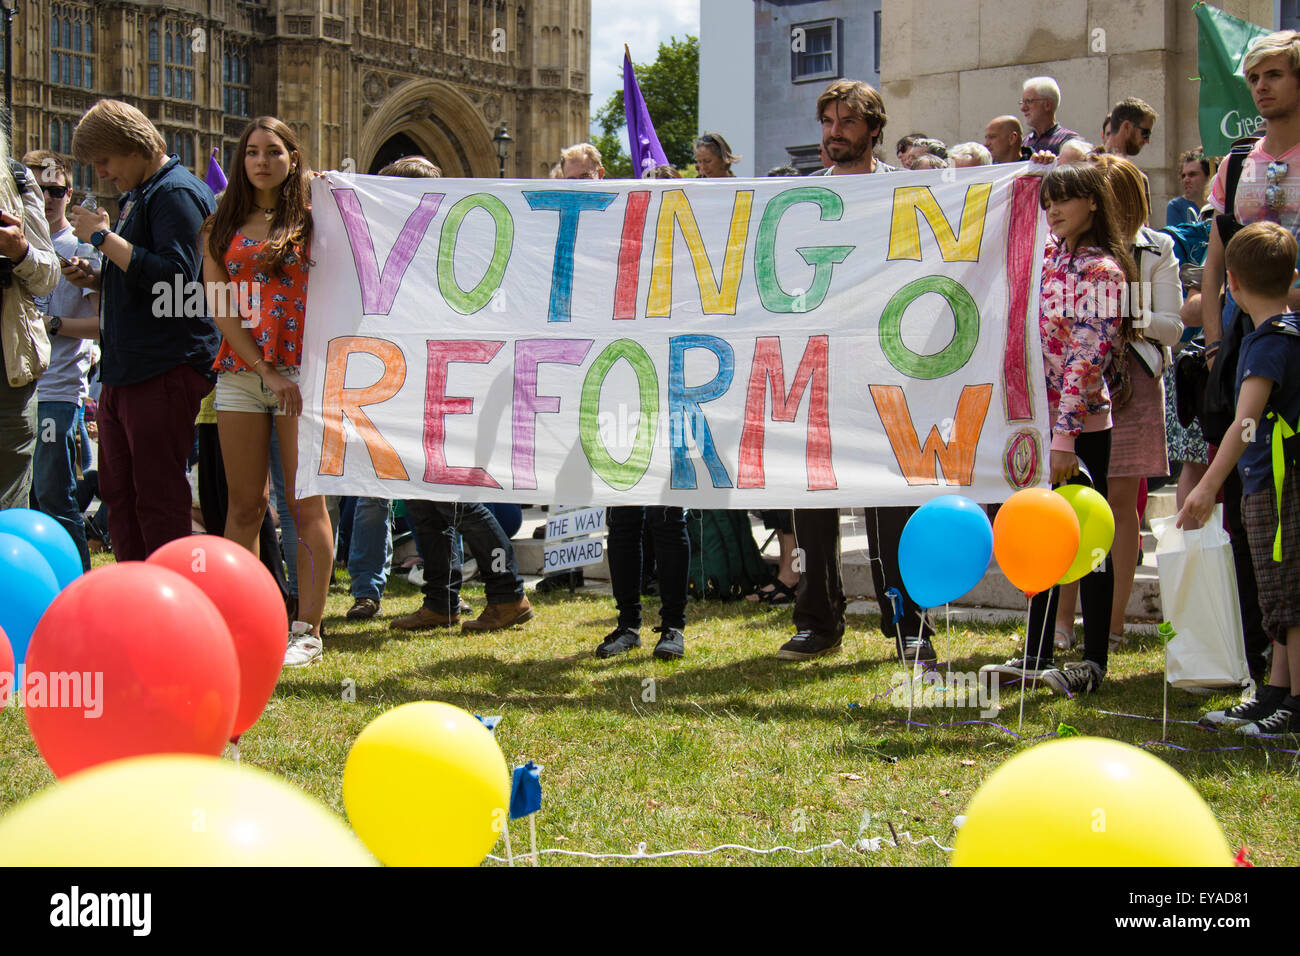 London, UK. 25th July, 2015. Protesters gather outside the Houses of Parliament to demand electoral reform, including proportional representation rather than the first-past-the-post method that saw the Tories gain a majority. Credit:  Paul Davey/Alamy Live News Stock Photo